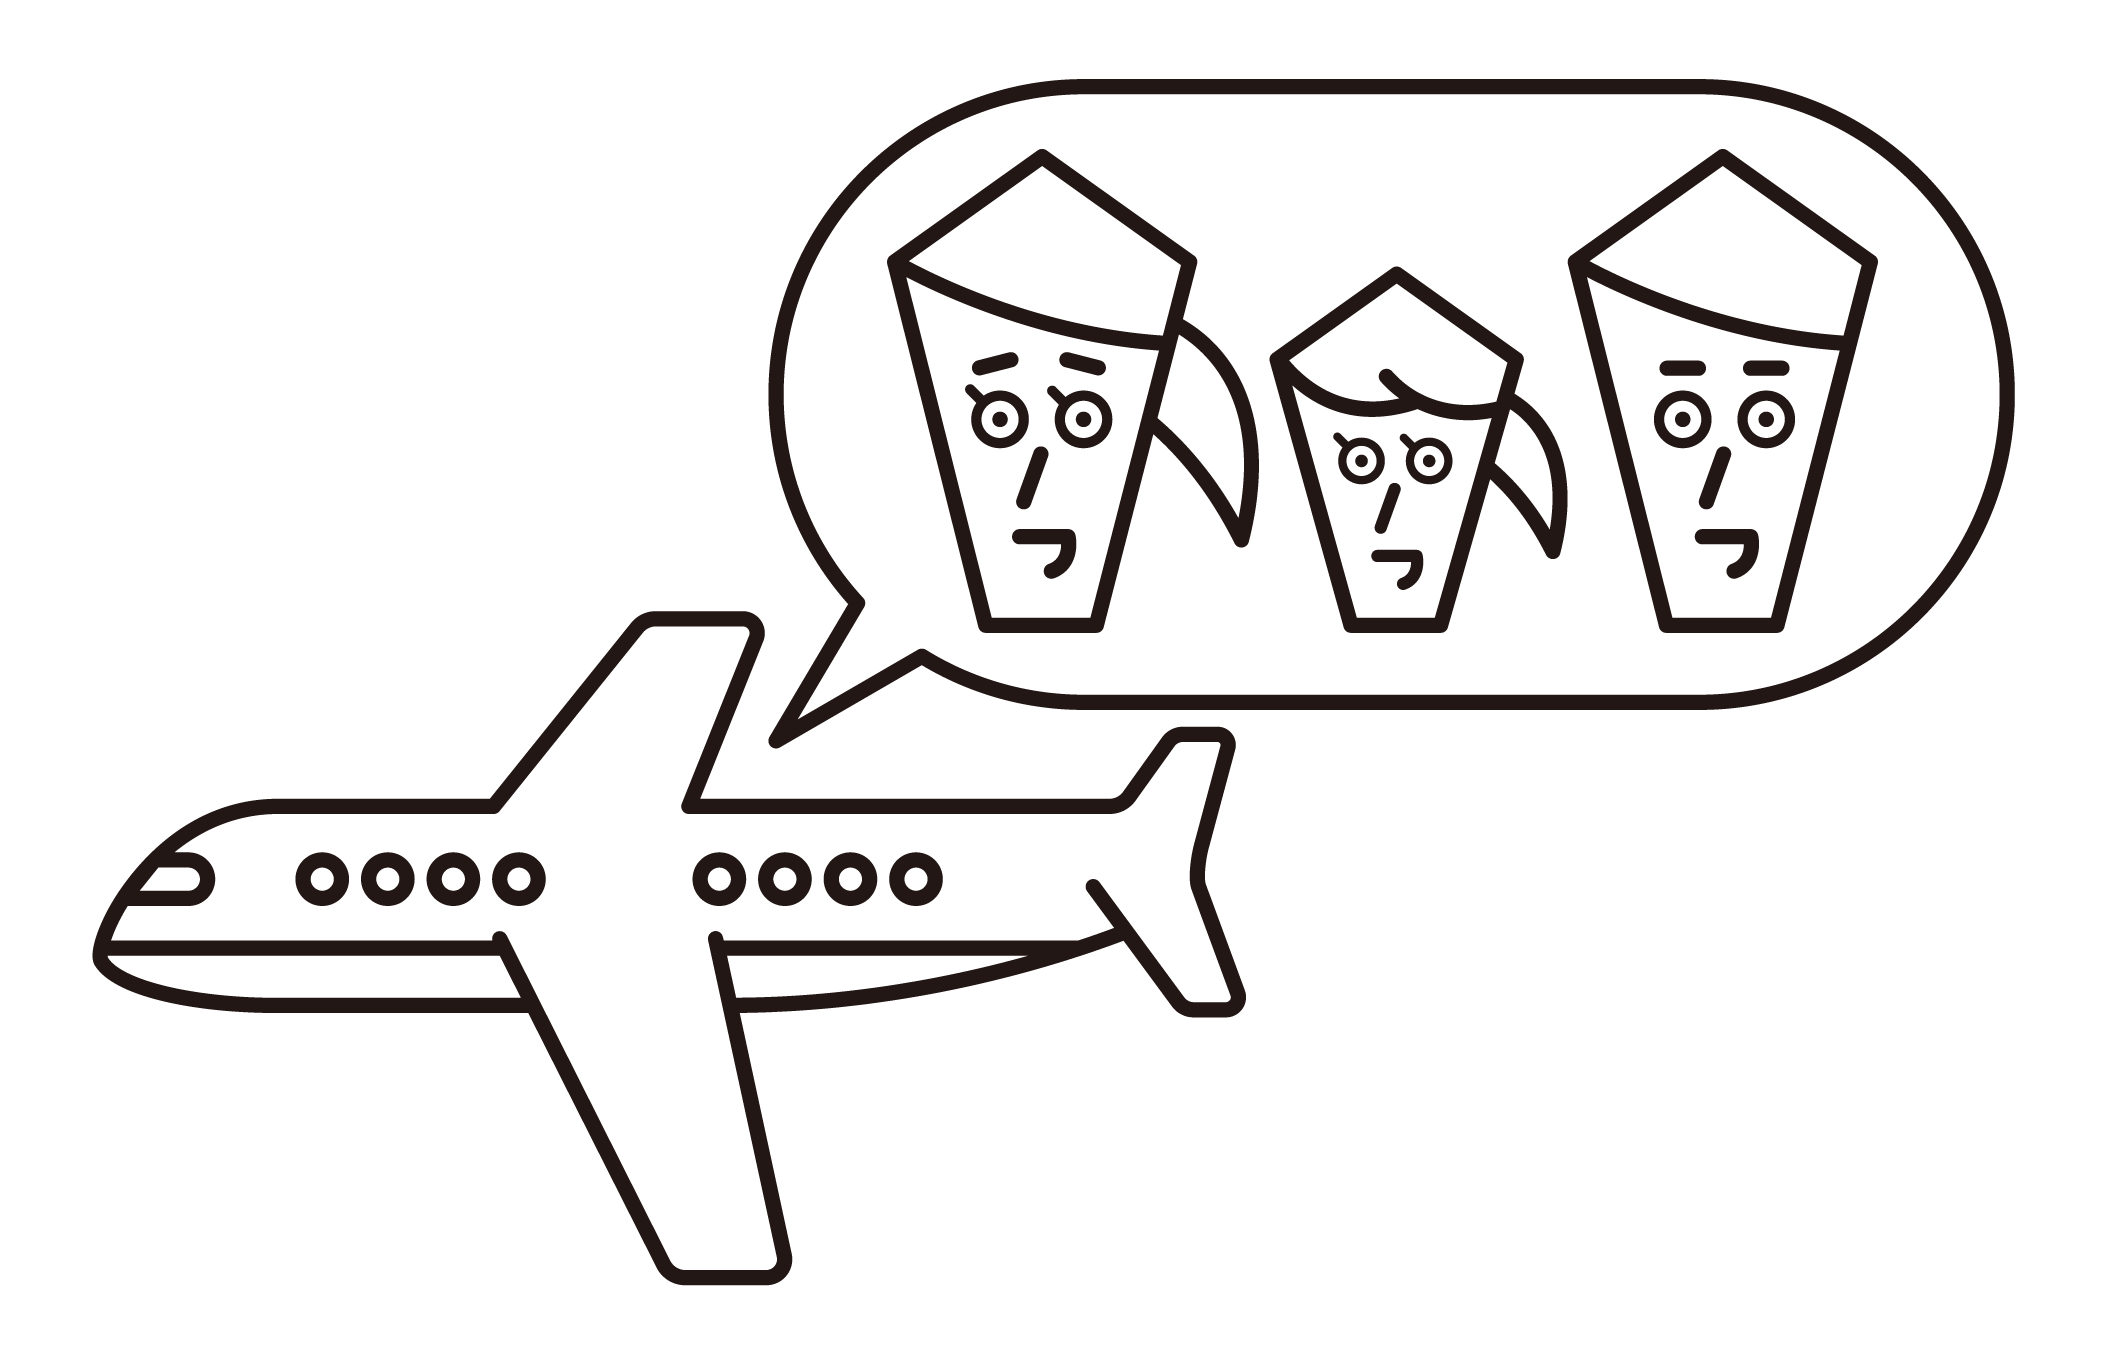 Illustration of a family on an airplane